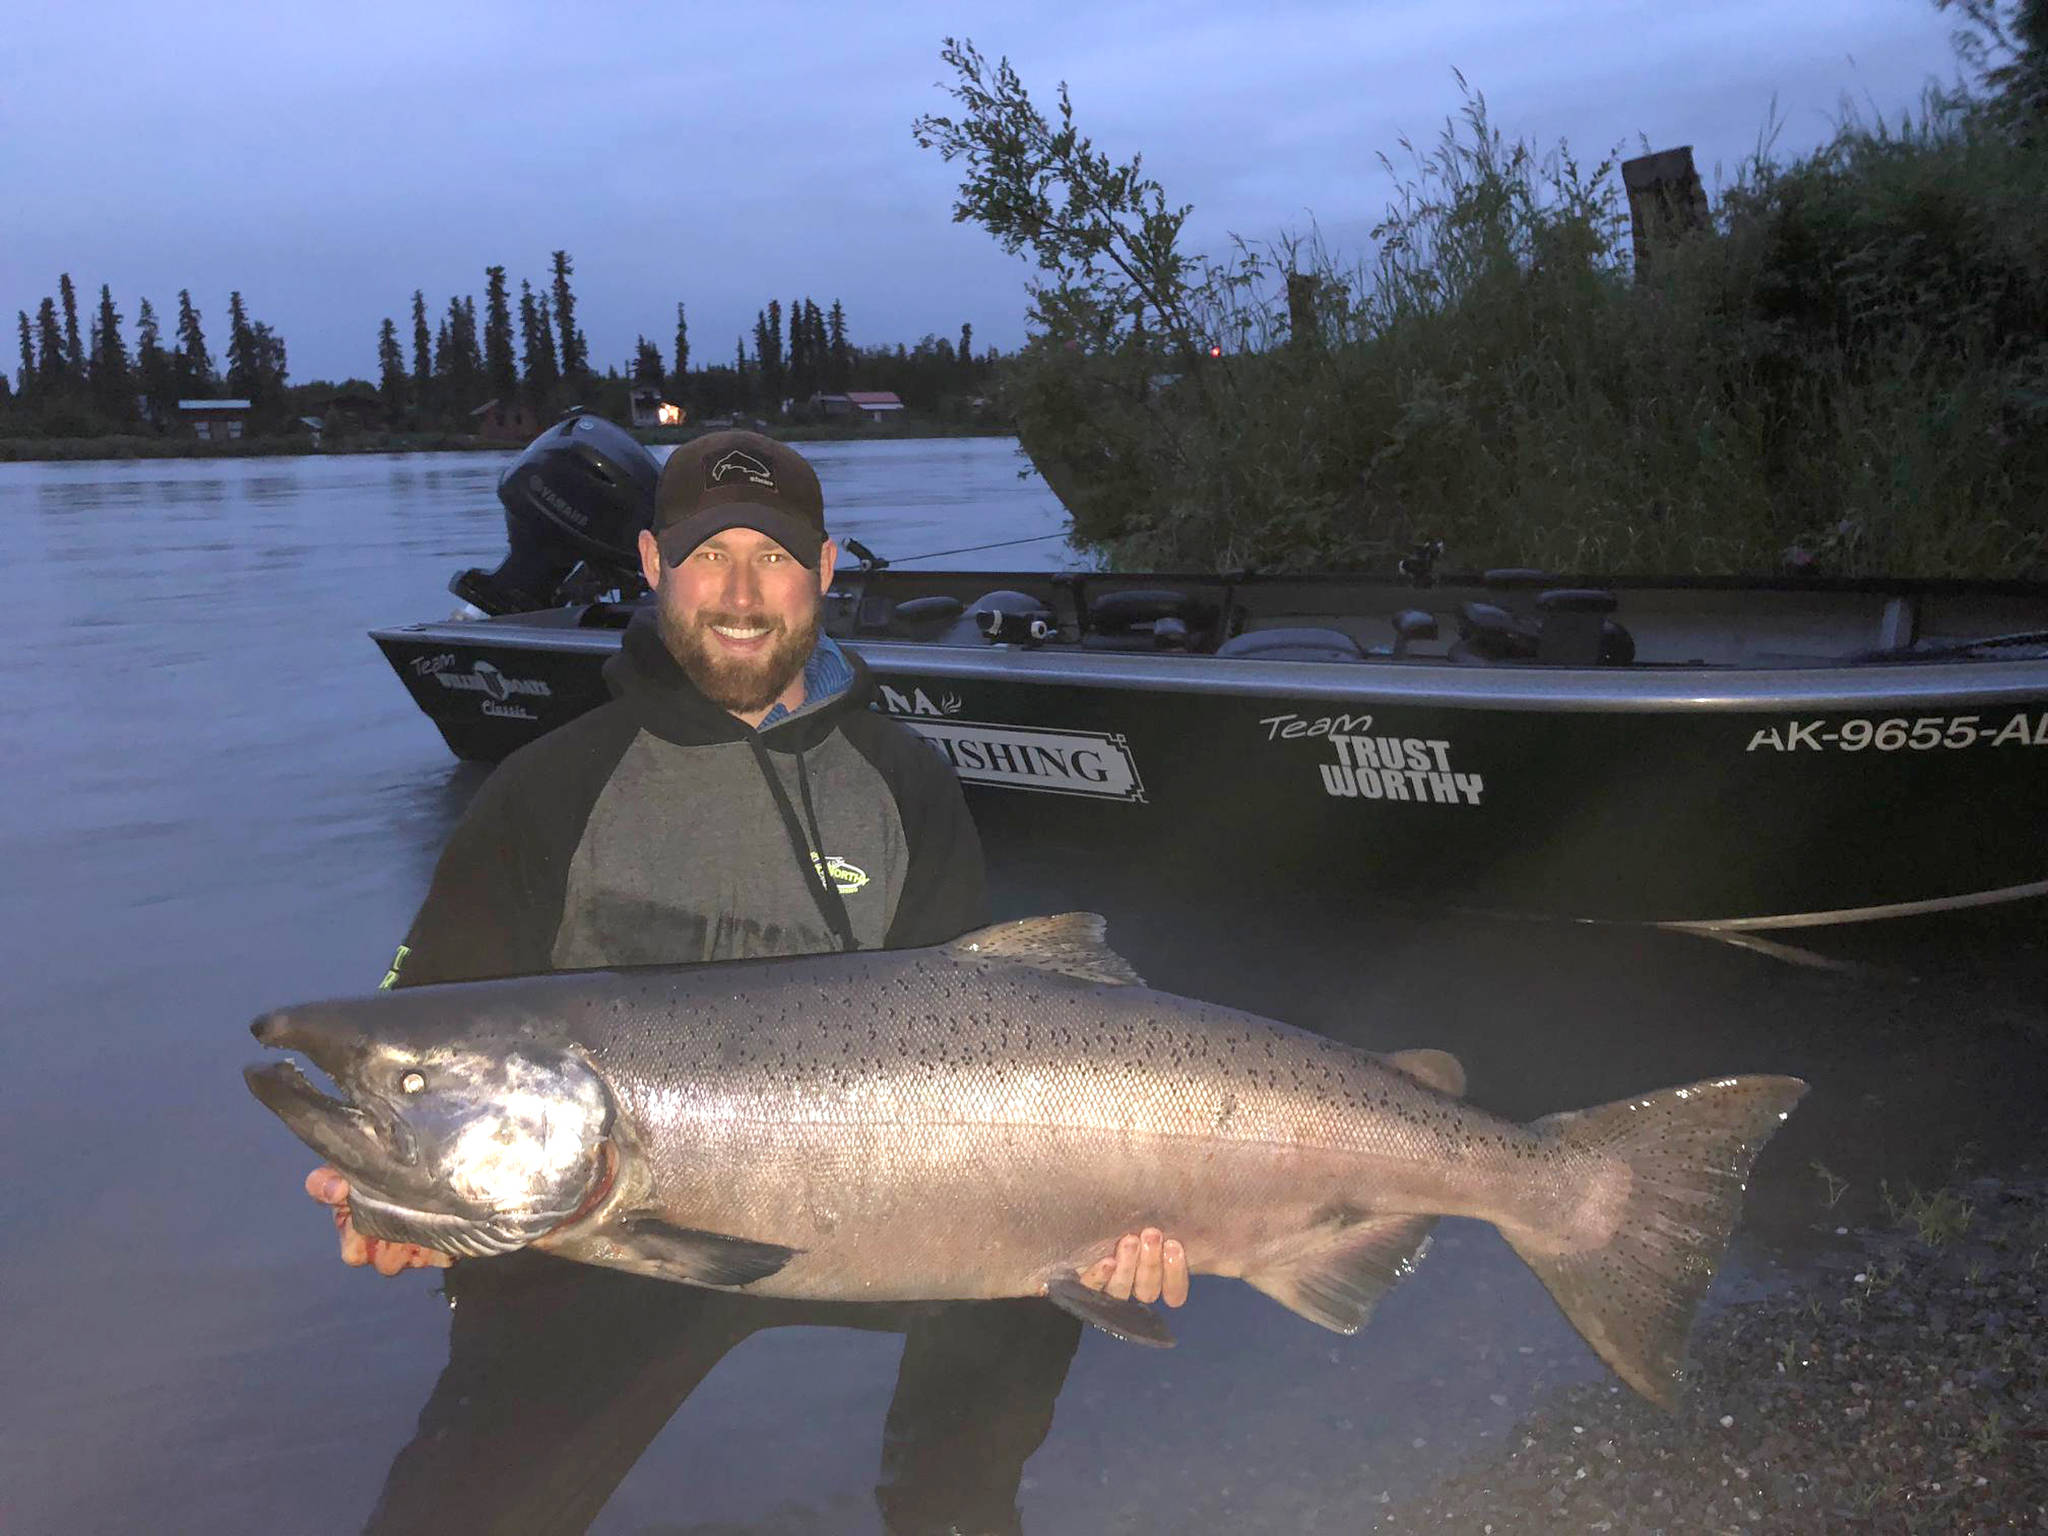 Sean Carlson shows off the 50-inch king salmon he caught on the Kenai River. (Photo courtesy Scott Miller)